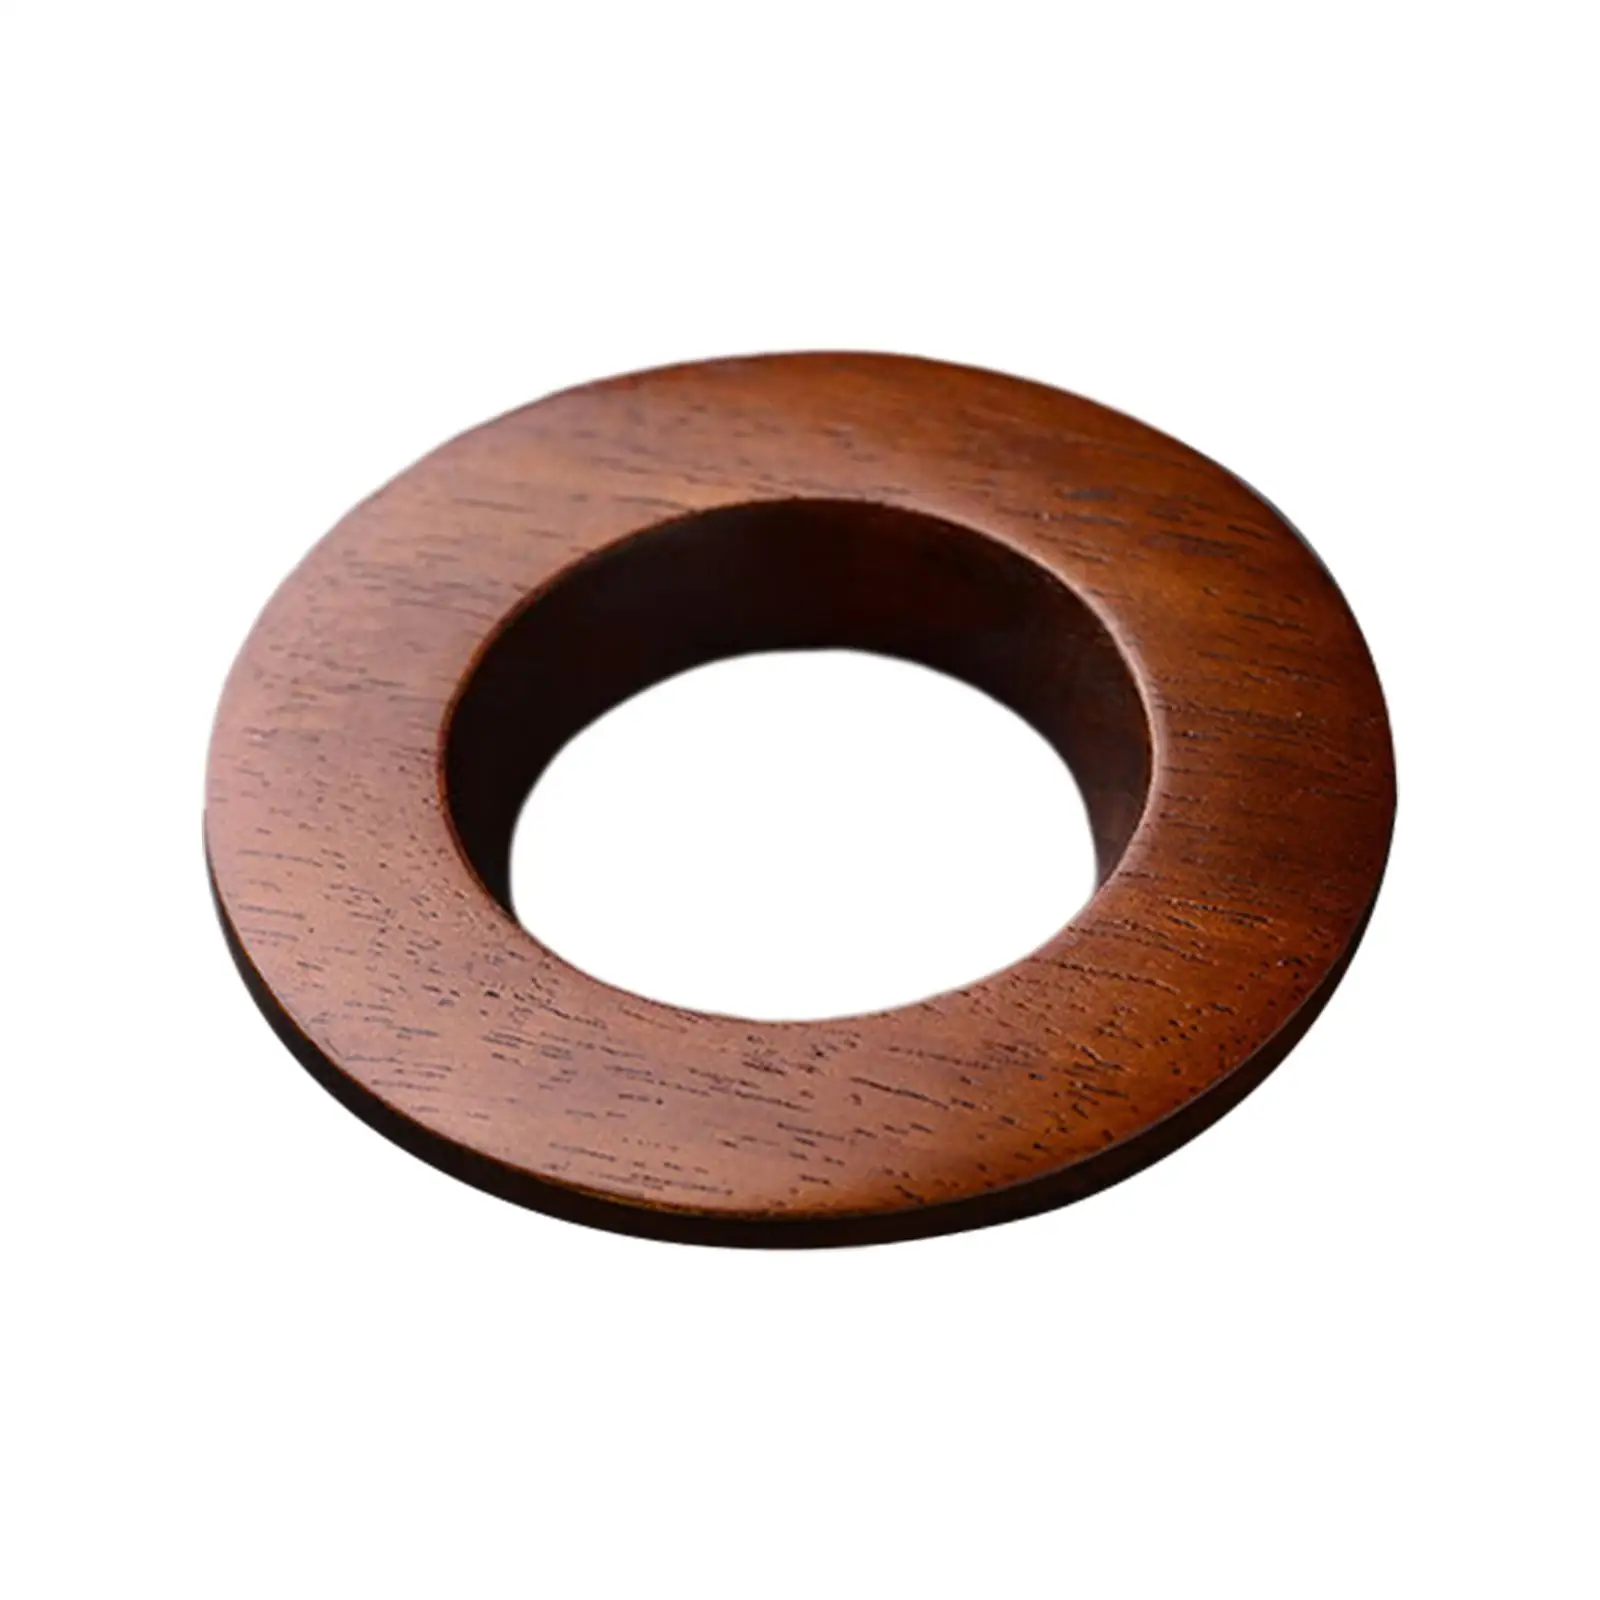 Wood Pour Over Drip Holder Manual coffee Brewing Coffee Accessories Coffee Dripper stand wooden Base for home Travel